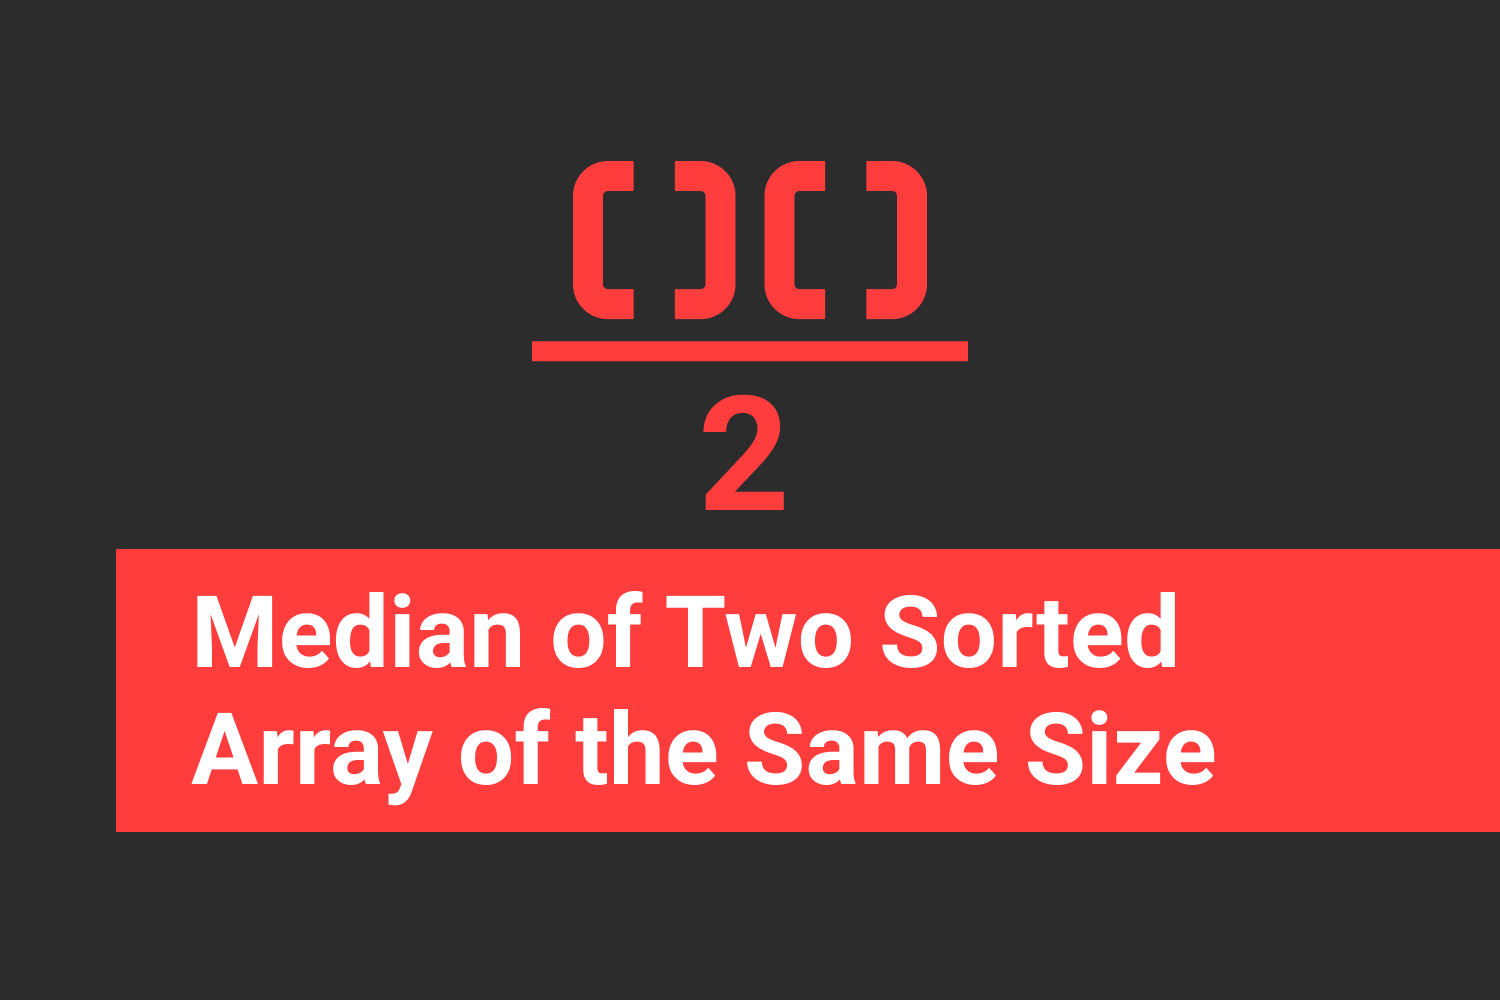 Median of the Two Sorted Array of Same Size